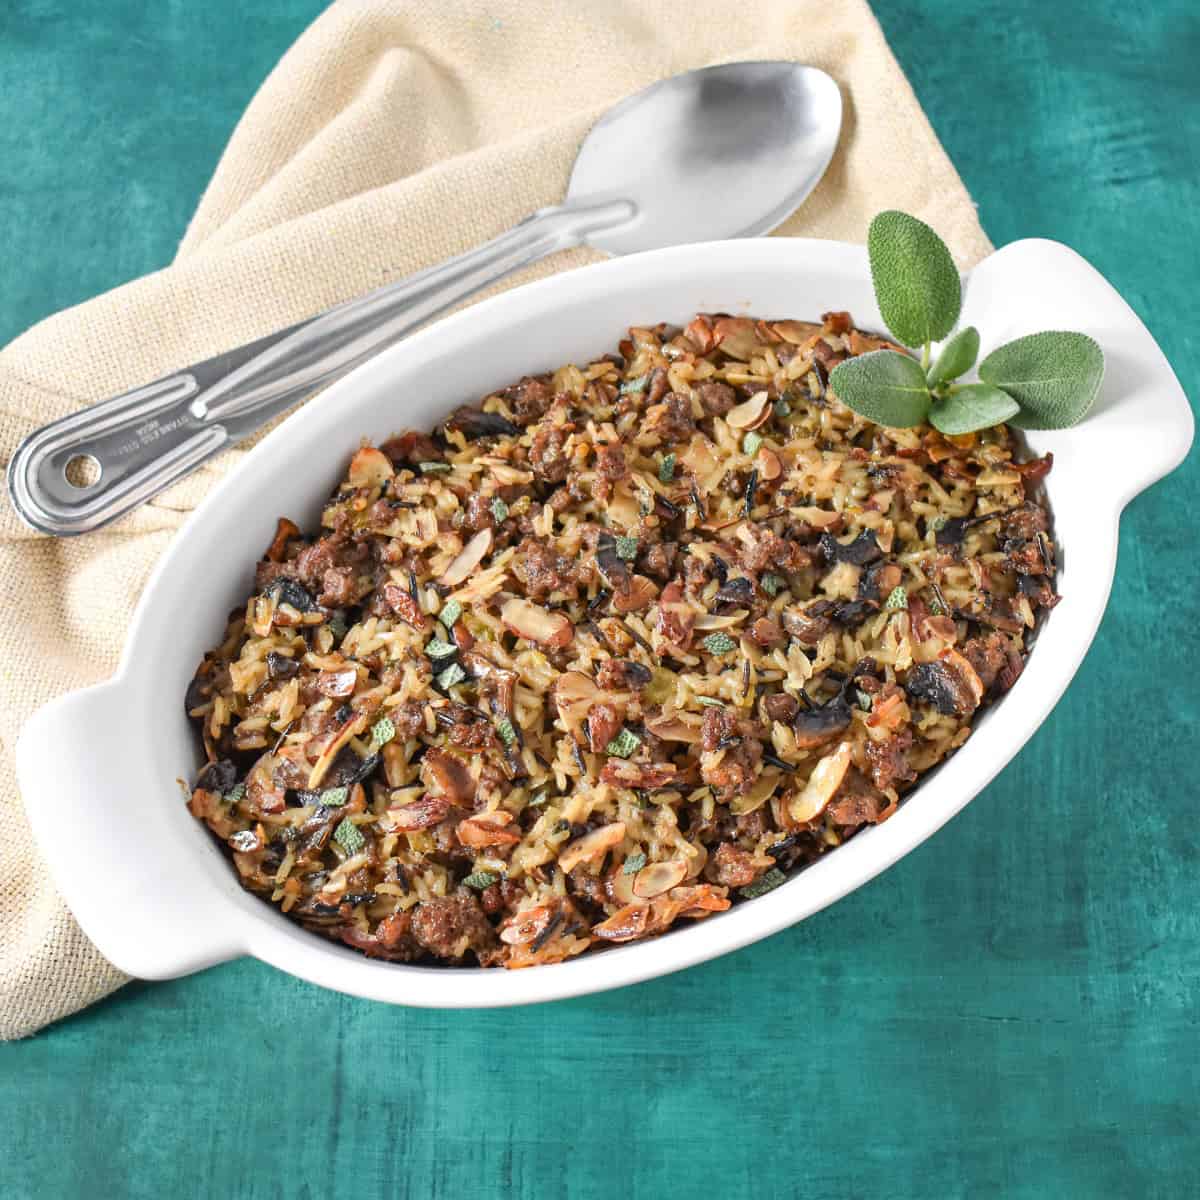 The finished sausage wild rice casserole garnished with sage and set on a green table with a beige linen.